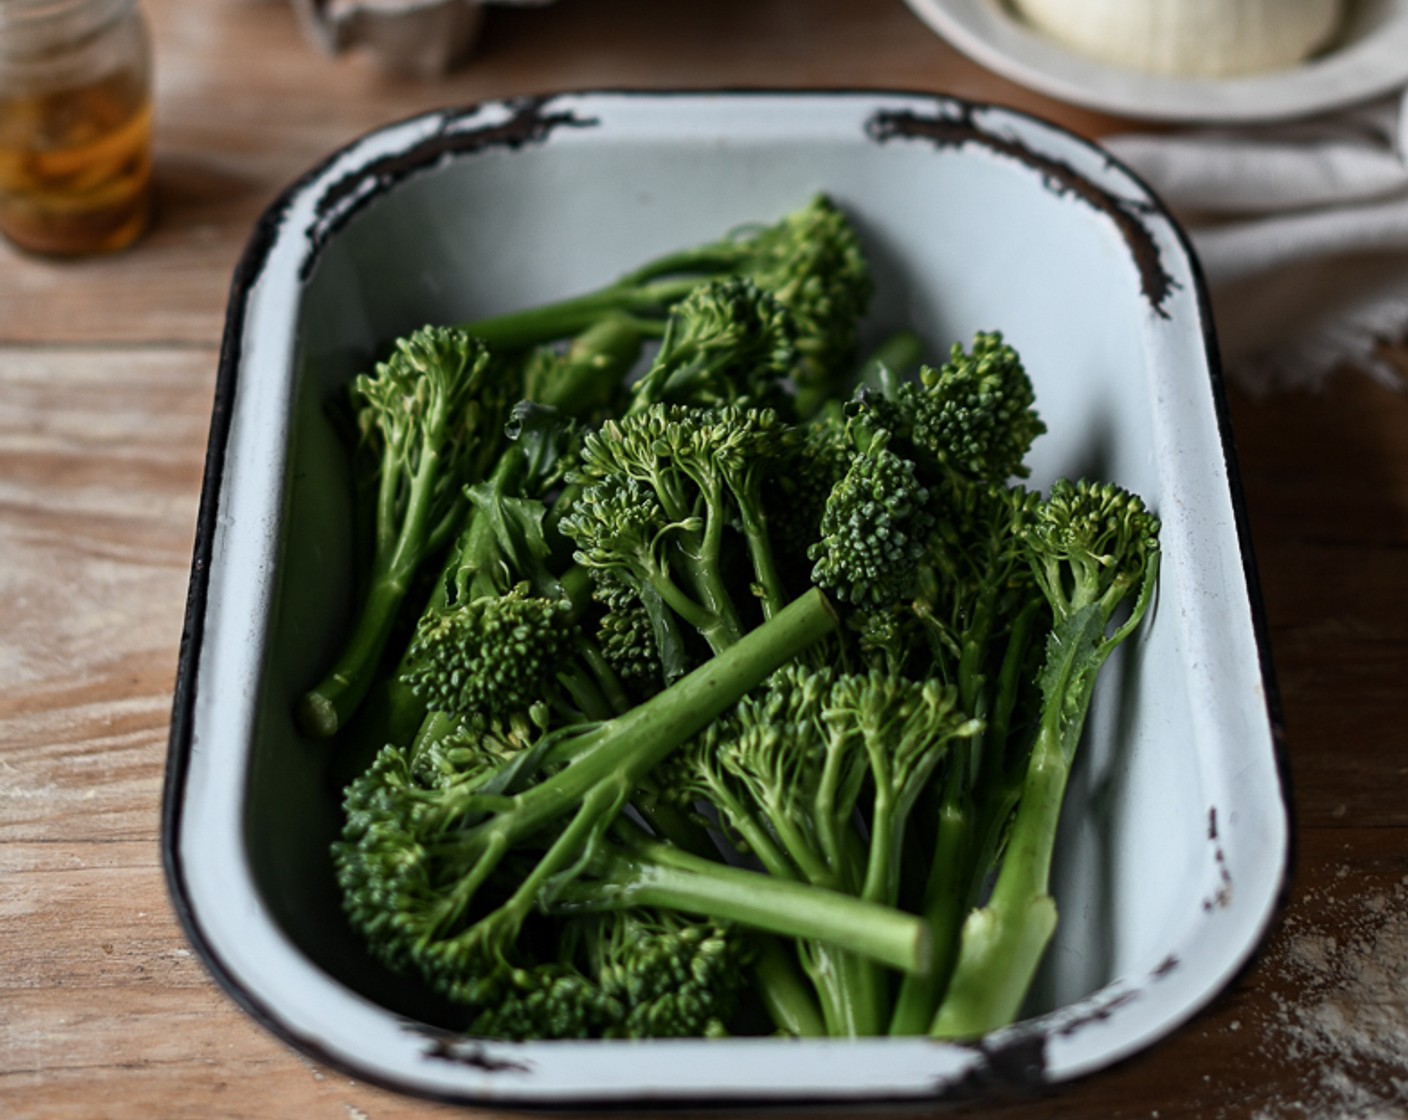 step 2 In a large bowl, combine the Broccolini (1 cup) with Crushed Red Pepper Flakes (1 Tbsp) and drizzle over a little Olive Oil (as needed). Season the broccoli with Coarse Sea Salt (to taste) and Coarse Black Pepper (to taste) and arrange on a lined baking sheet.